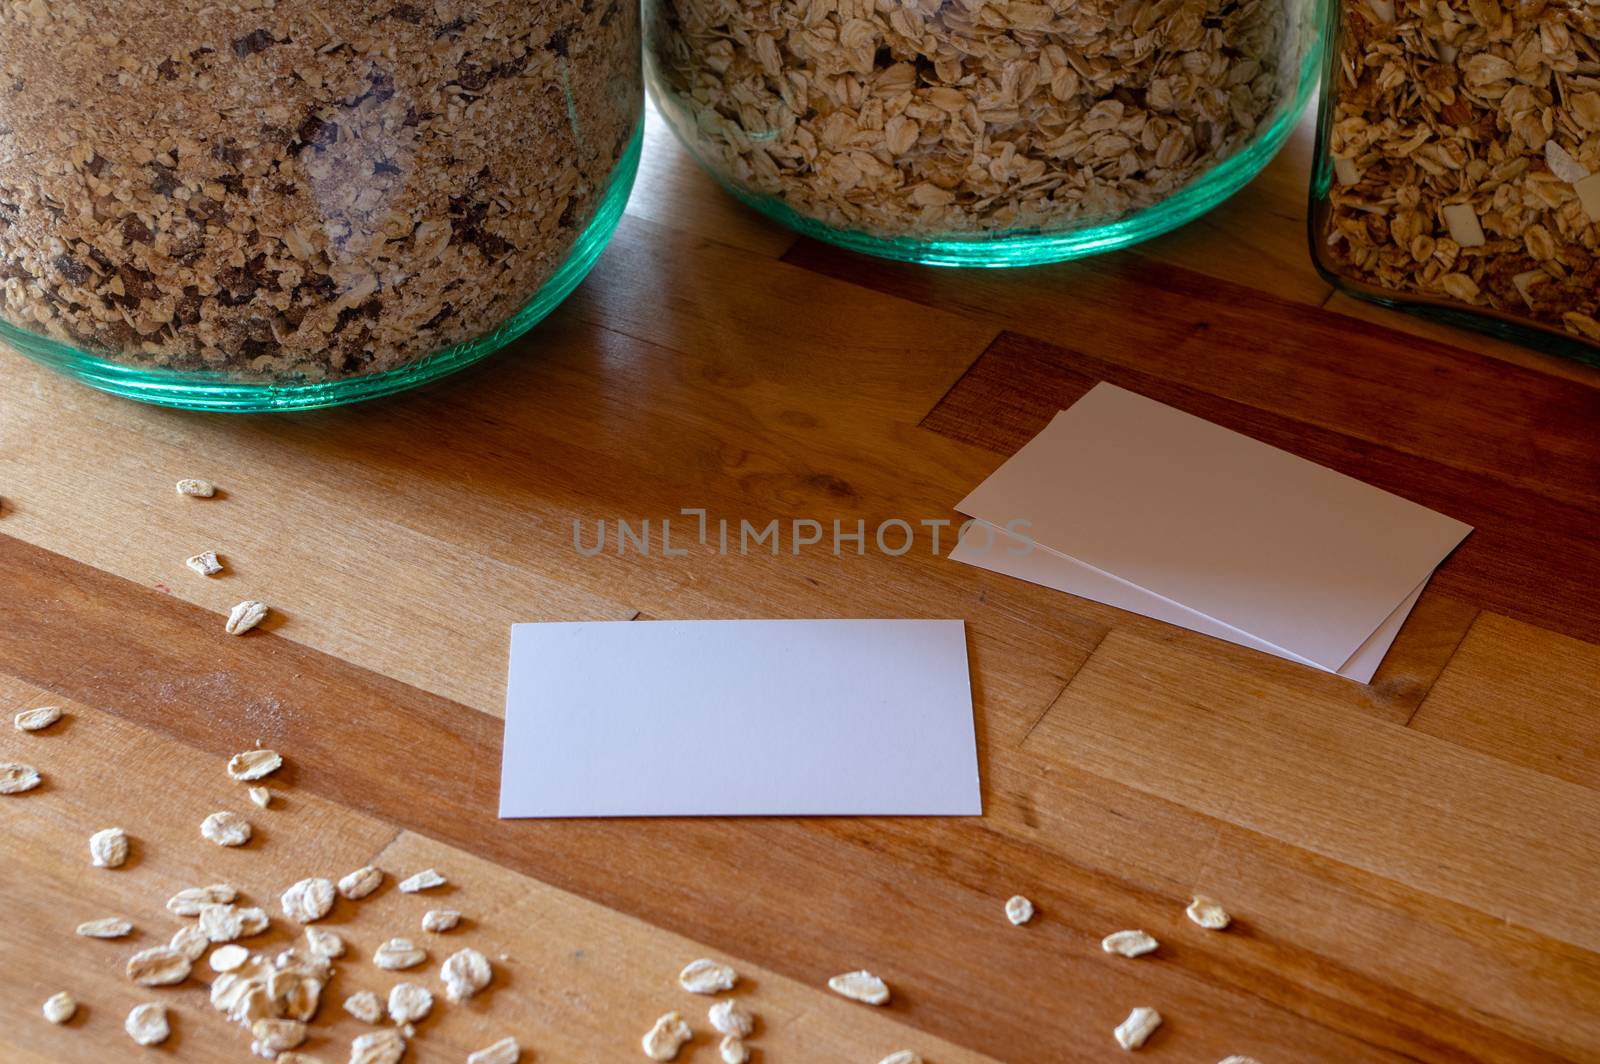 business card mockup templates on a table with sprinkled oatmeal - muesli jars in background by MarcoWarm